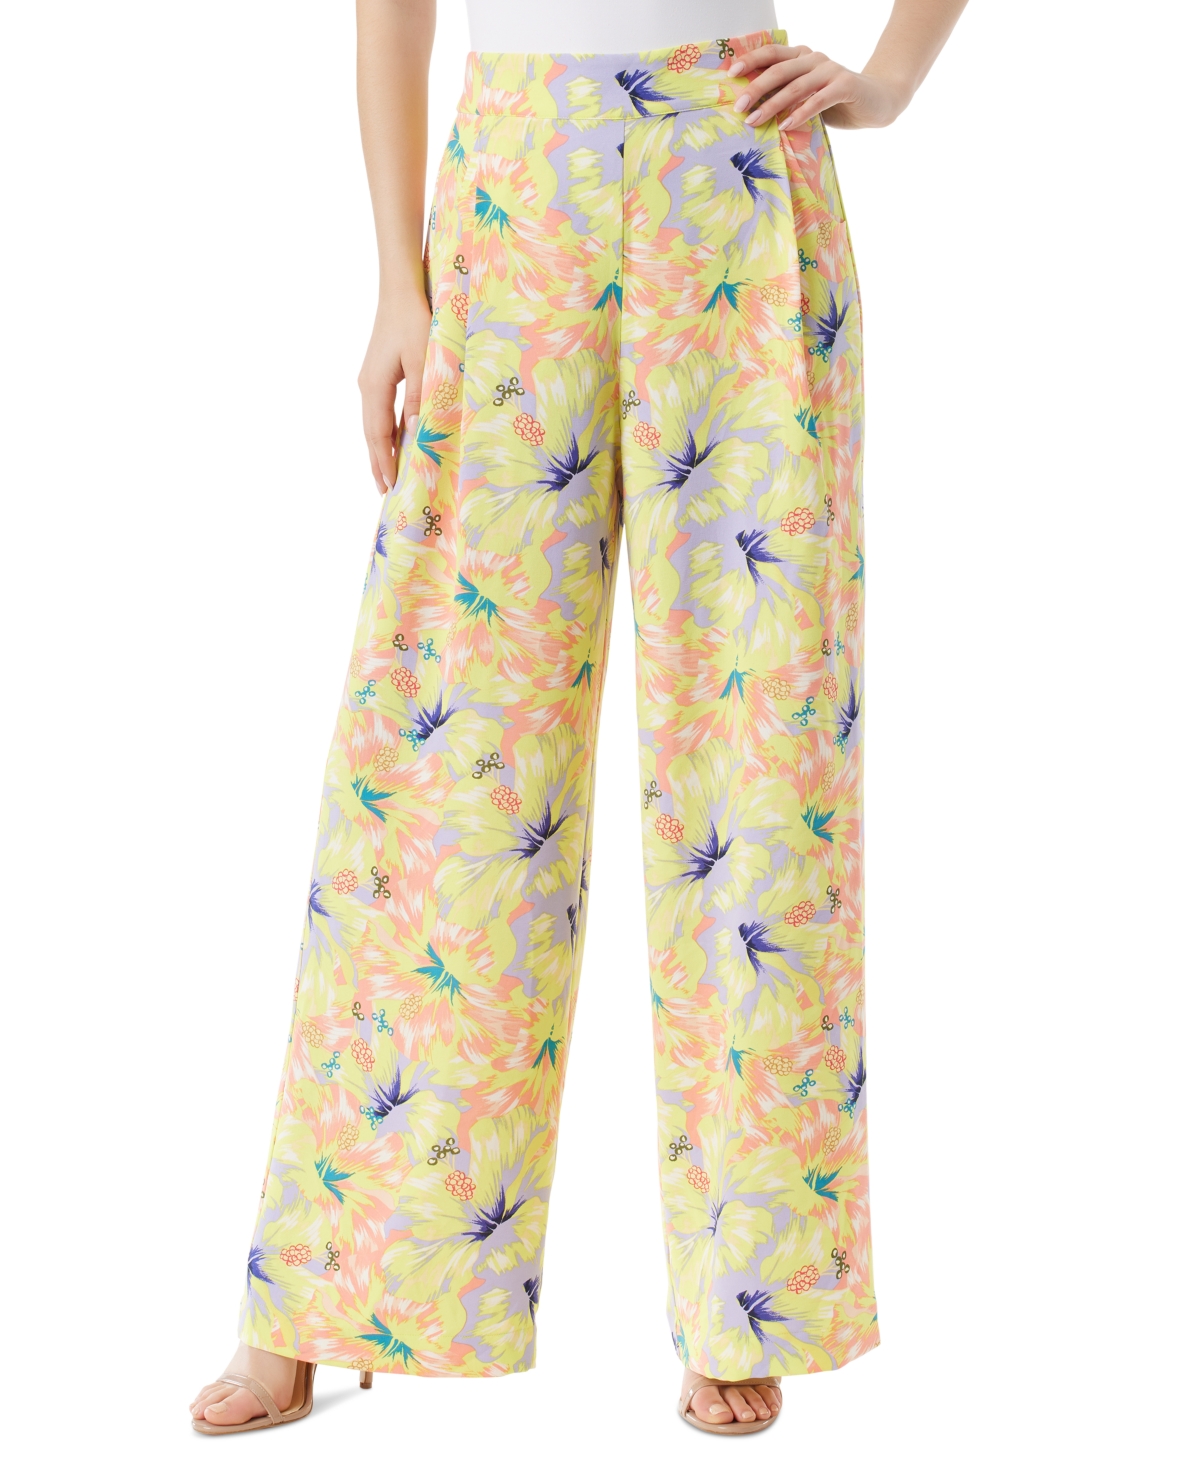 Winnie Floral-Print Pull-On Wide-Leg Pants - Apricot Hibiscus